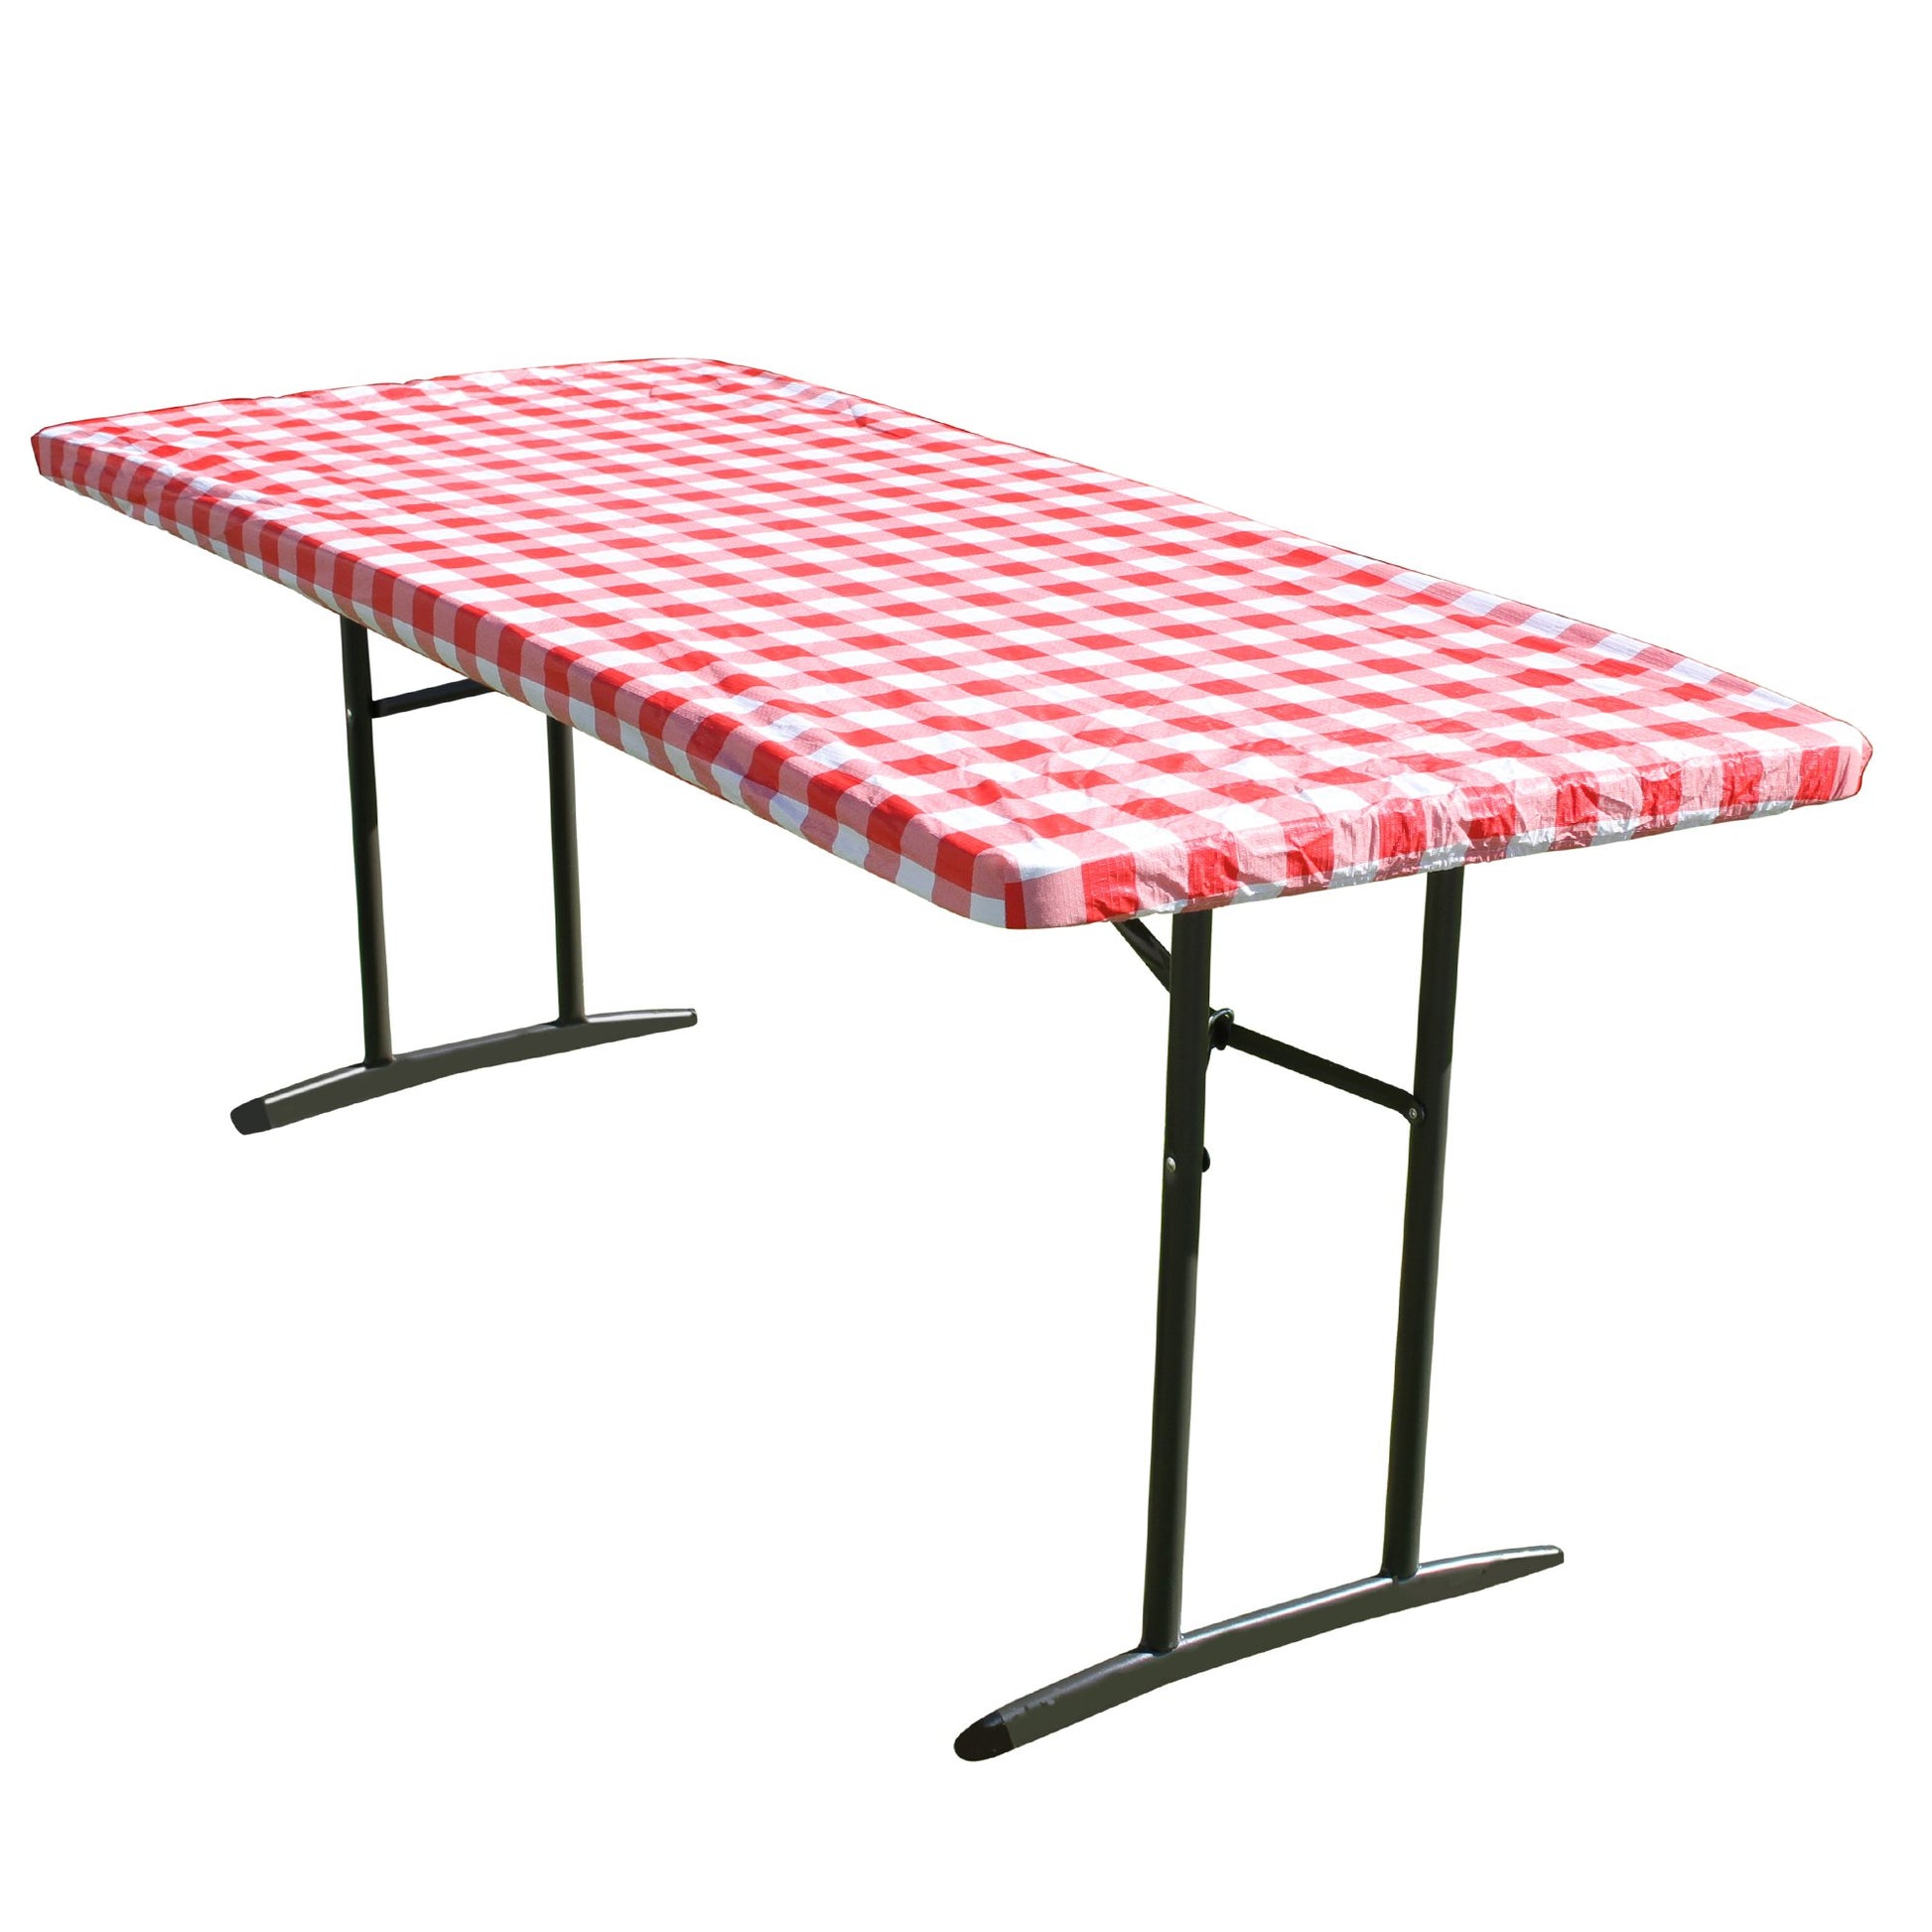 TableCloth PLUS 72" Checkerboard Red and White Fitted Polyester Tablecloth for 6' Folding Tables displayed adorning a folding table